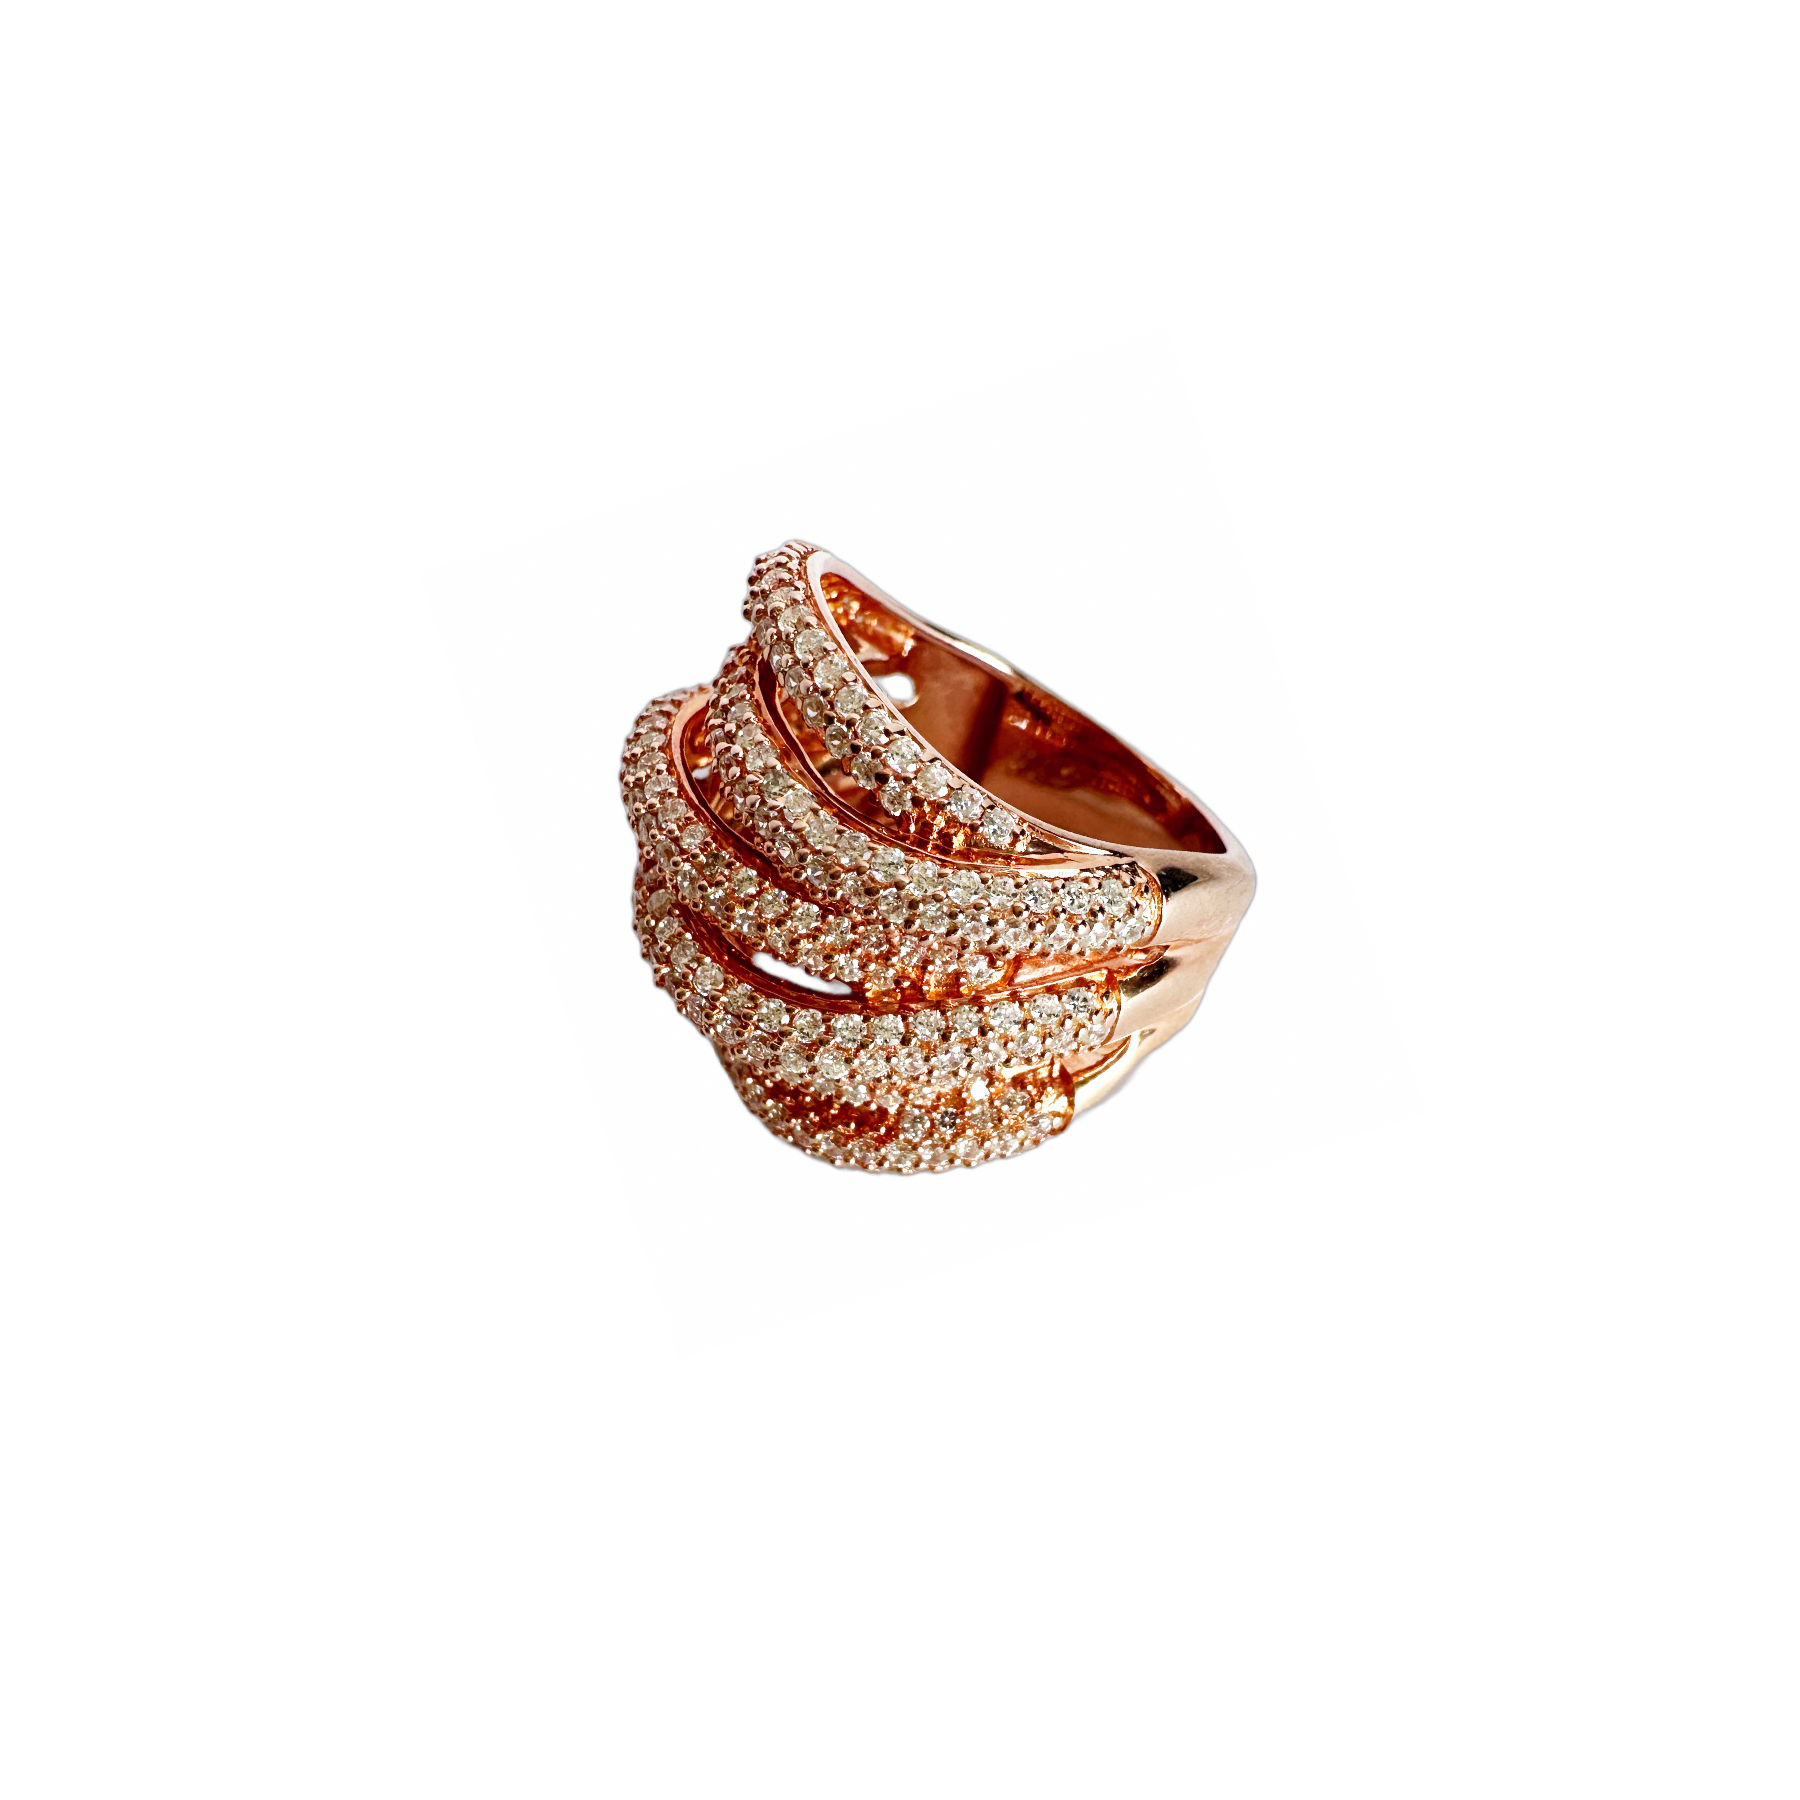 "Twinkle Twinkle Twist" Rose Goldtone Layered Cocktail Ring with Stones